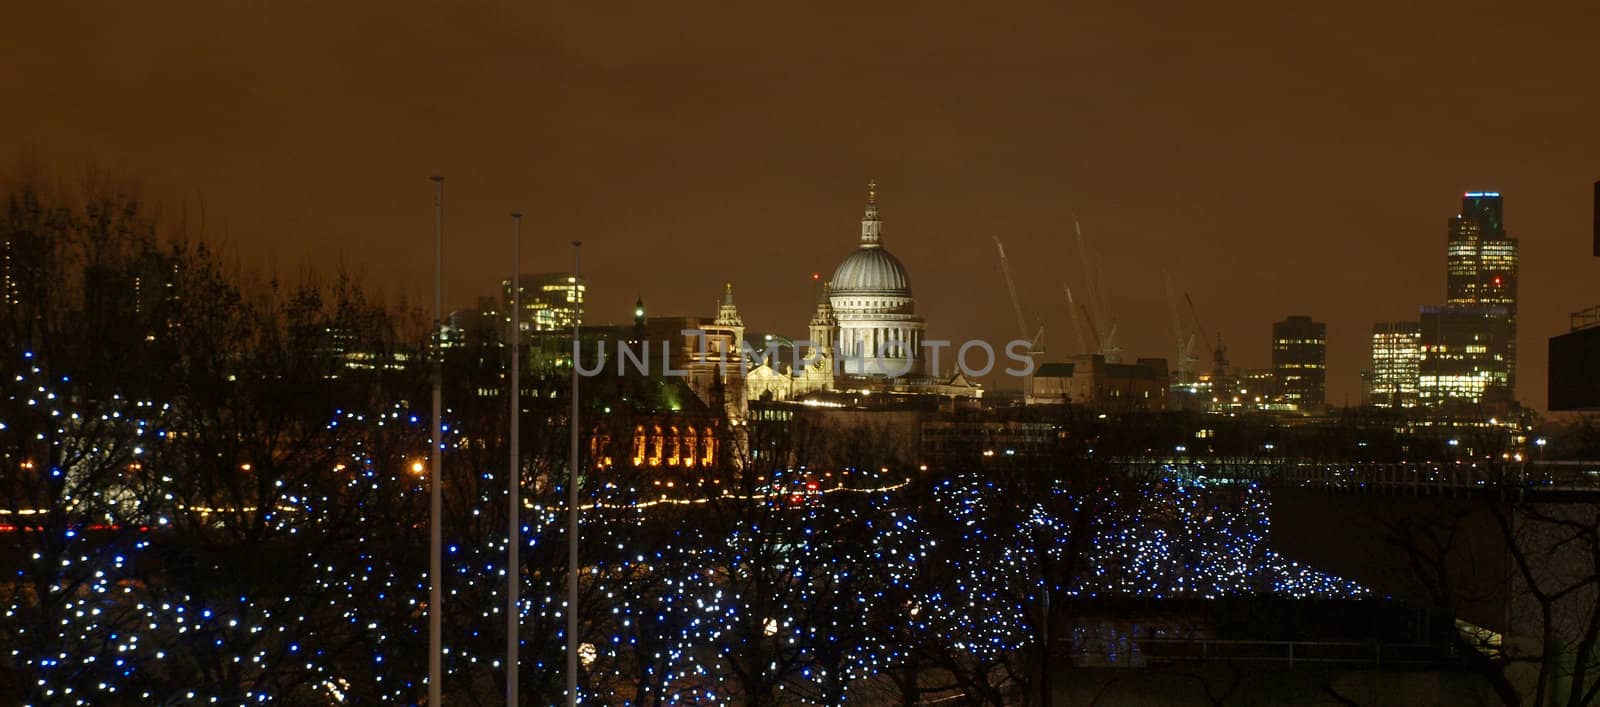 Night view of Saint Paul's Cathedral in the City of London, UK